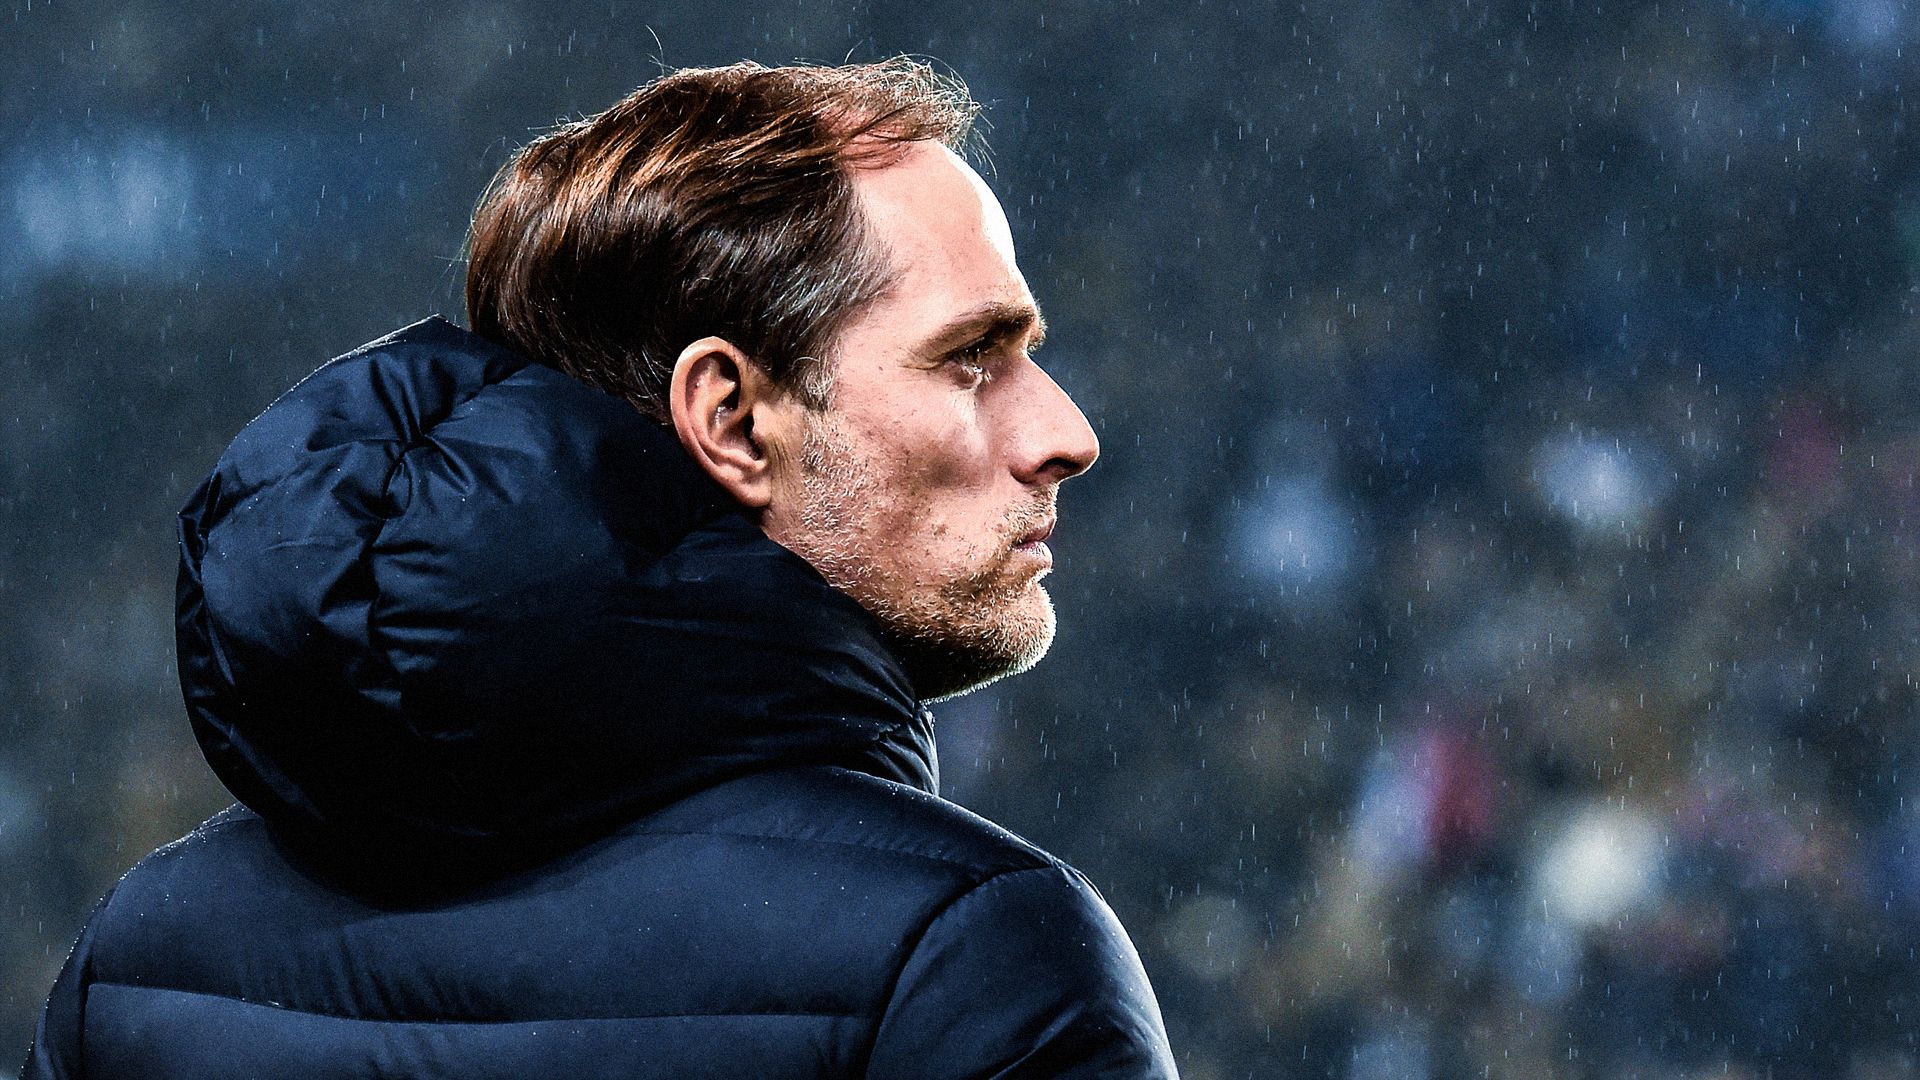 Fireworks, Fallouts And Attacking Football, Here's What Tuchel Brings To Chelsea